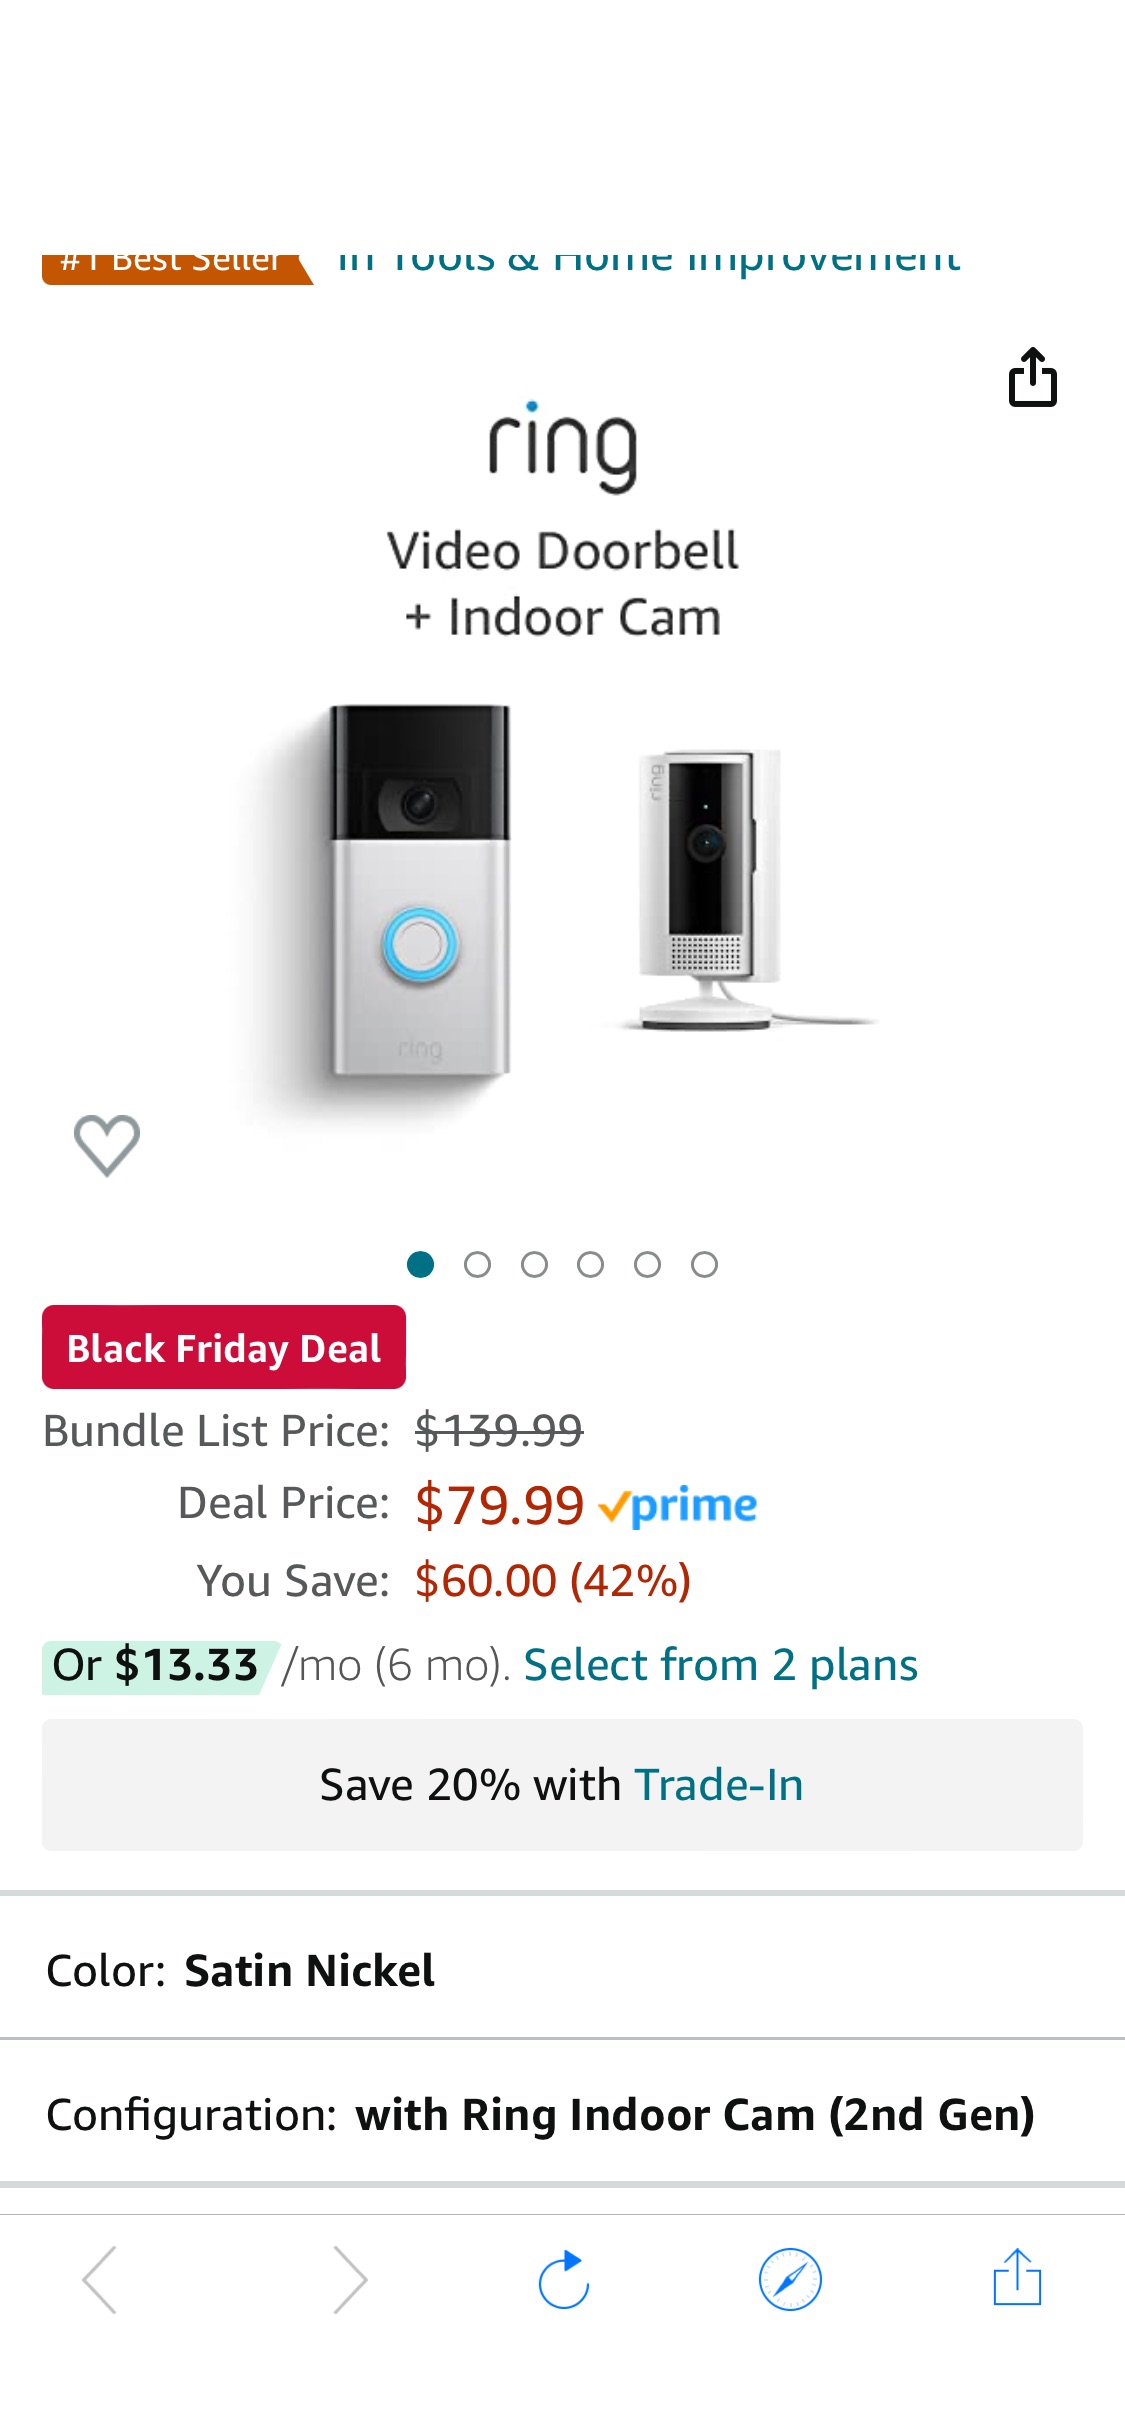 Amazon.com: Ring Video Doorbell, Satin Nickel with All-new Ring Indoor Cam, White : Tools & Home Improvement